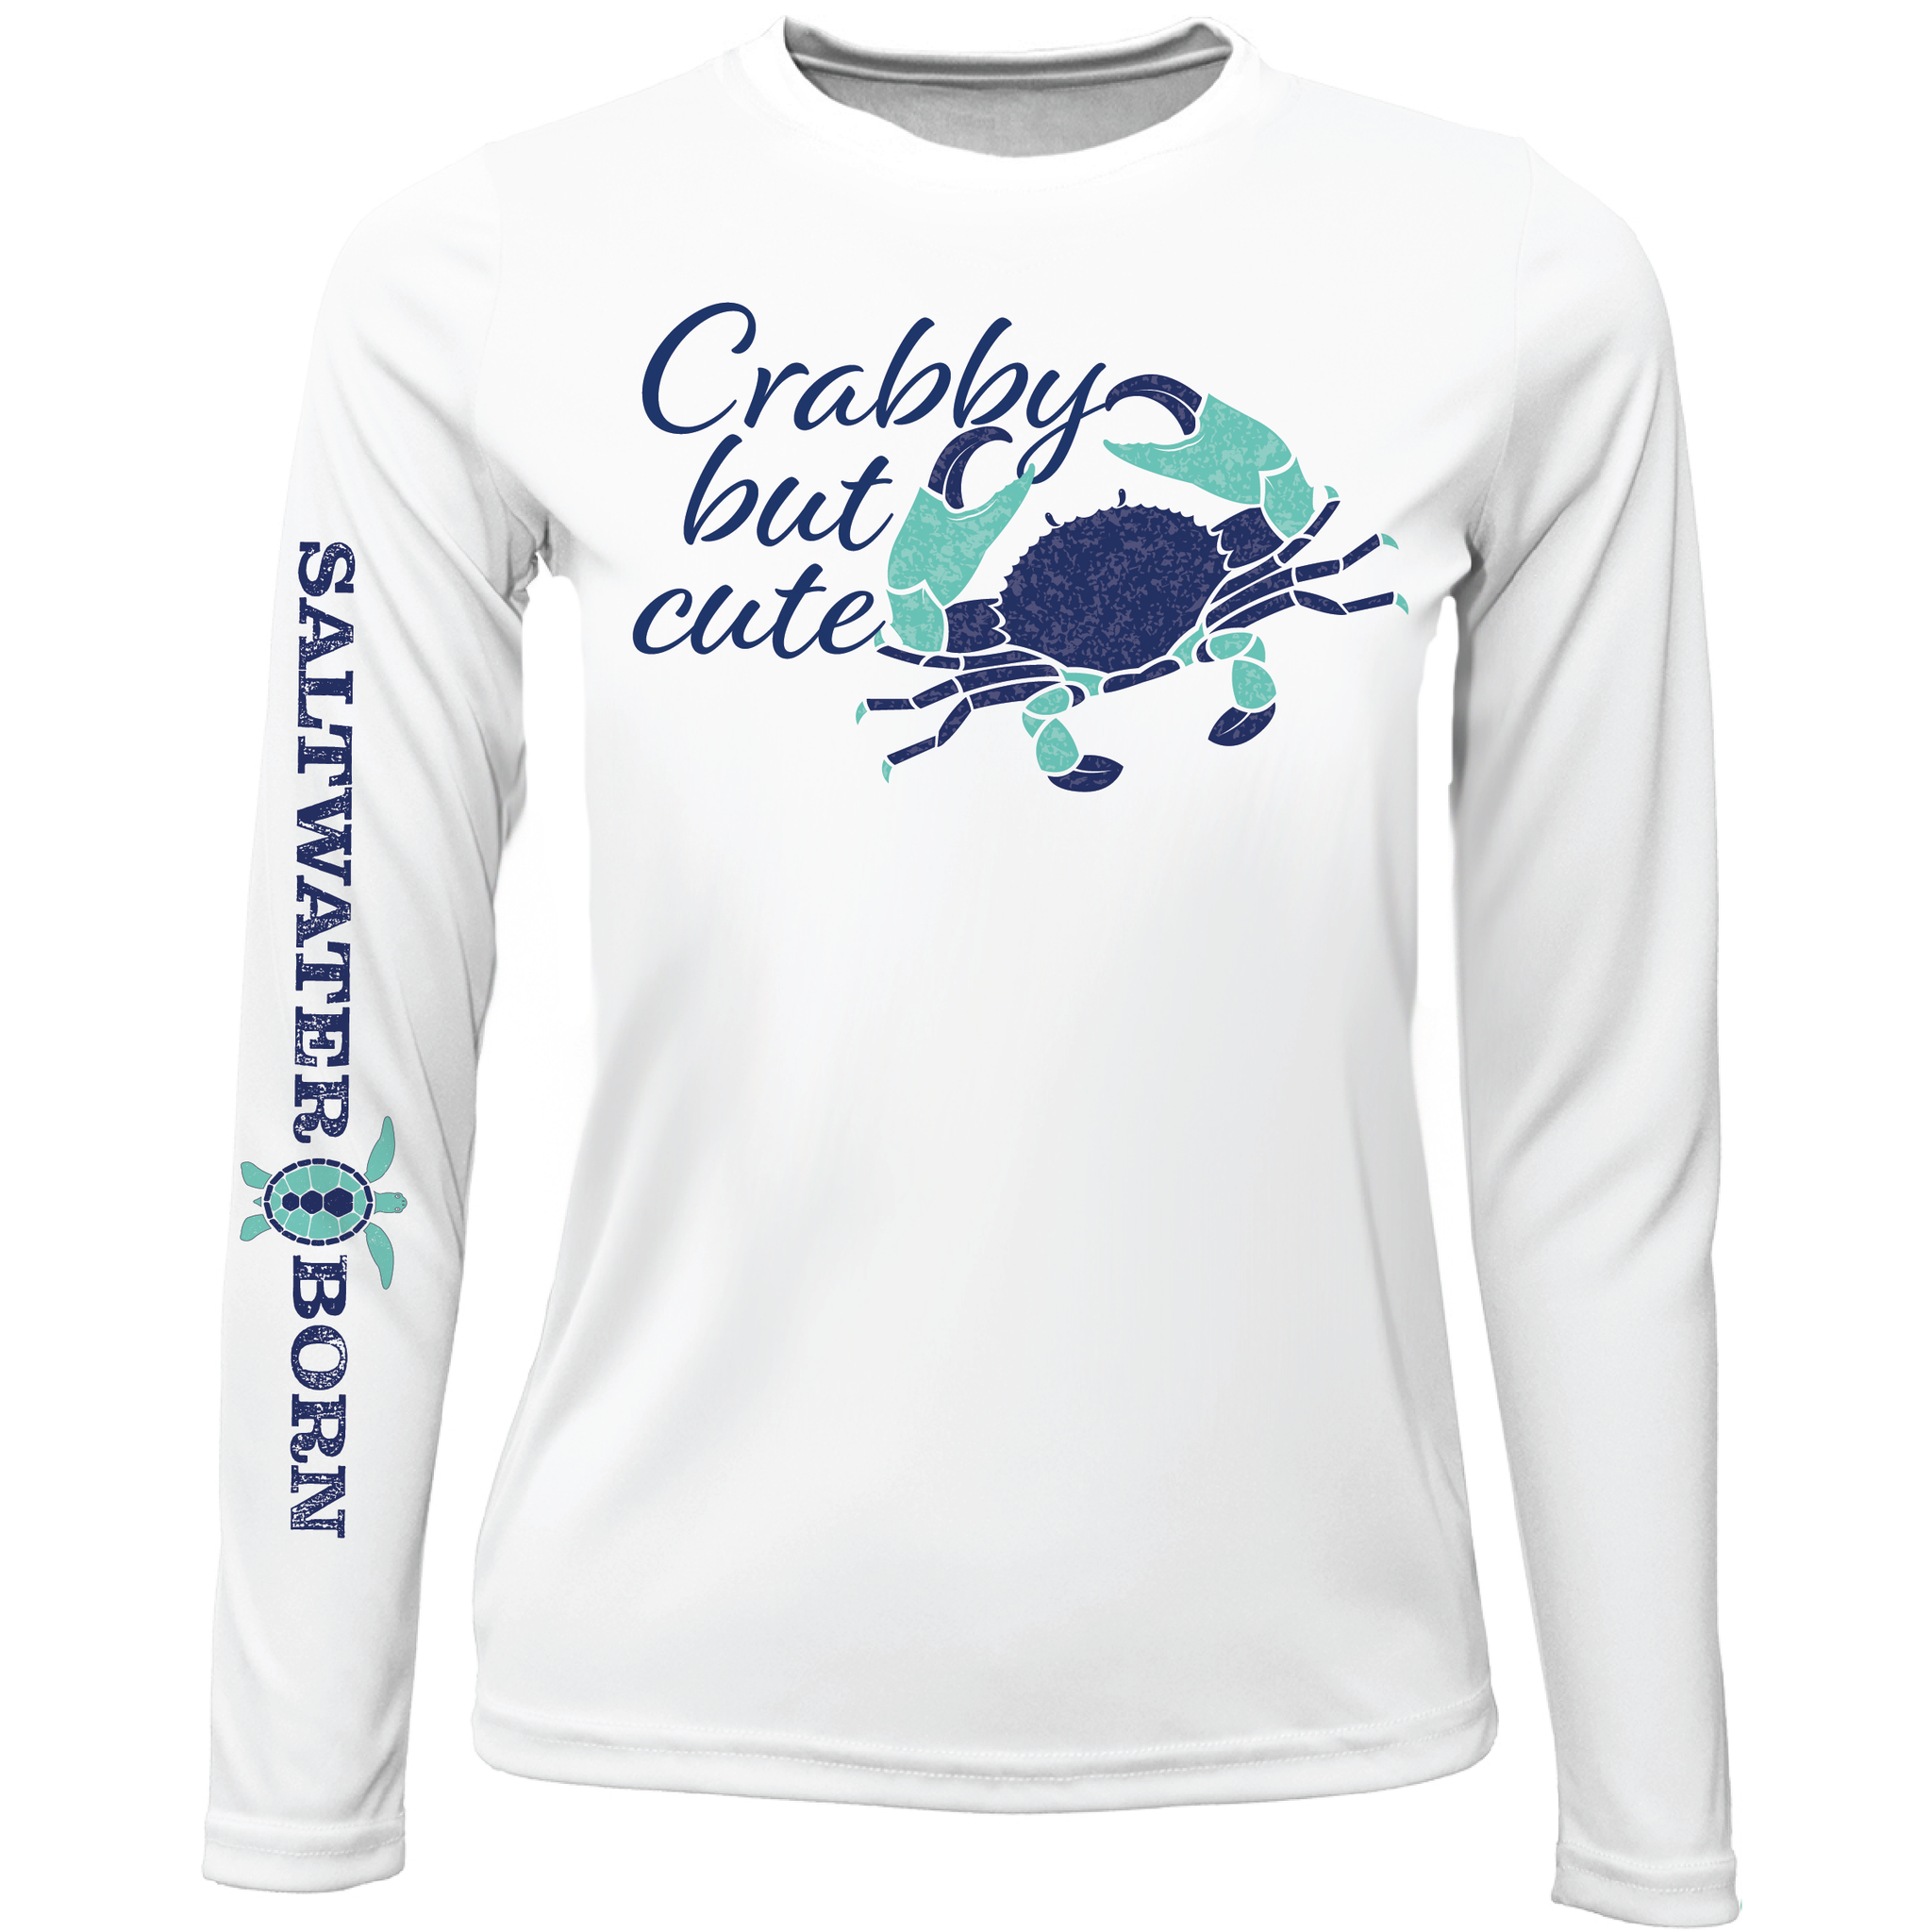 Key West, FL "Crabby But Cute" Girl's Long Sleeve UPF 50+ Dry-Fit Shirt